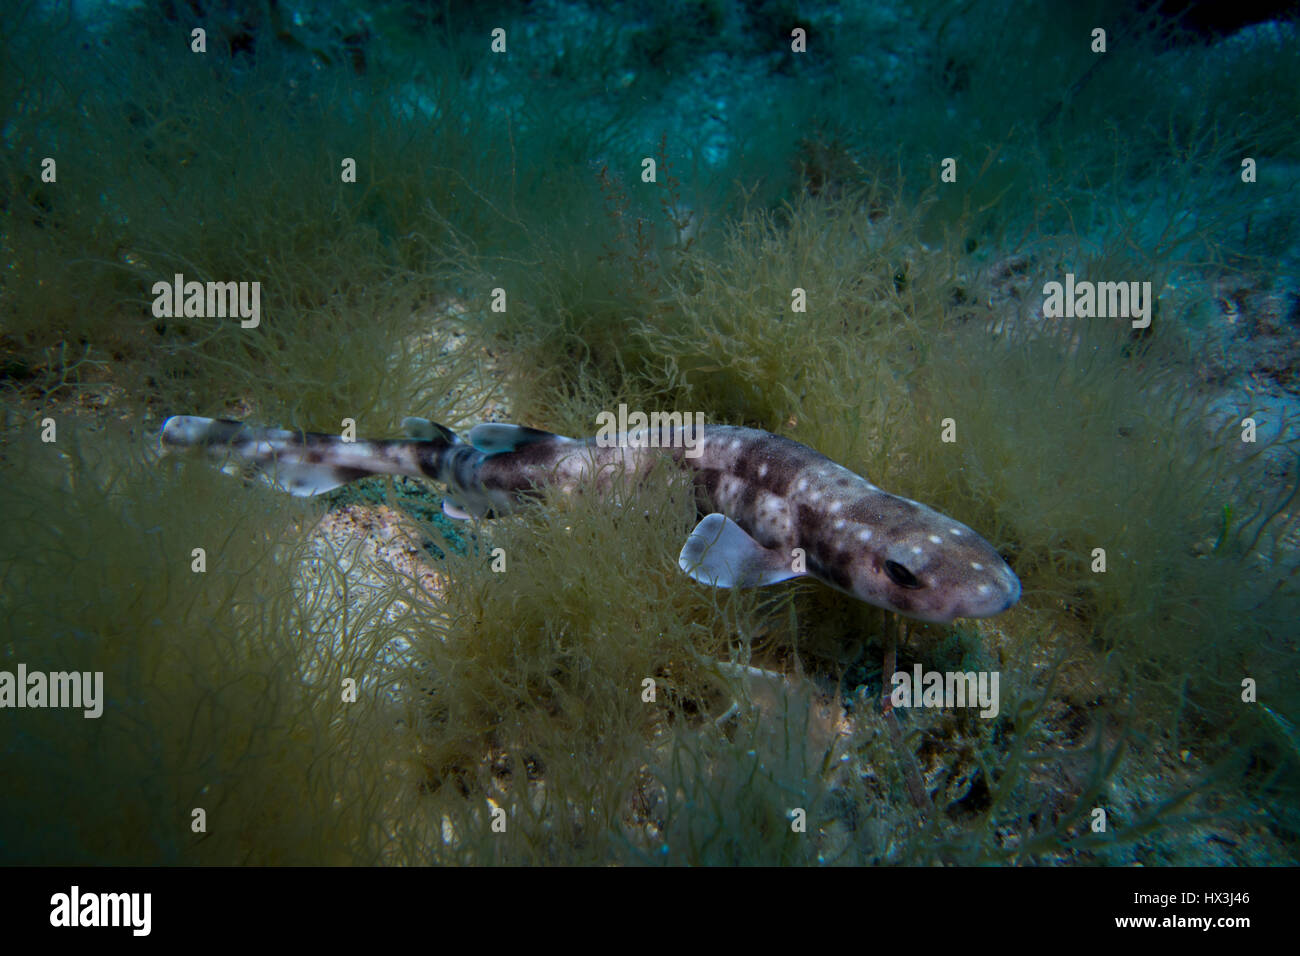 Smaller-spotted catshark, Scyliorhinus canicula, from the Mediterranean Sea. This picture was taken in Malta. Stock Photo